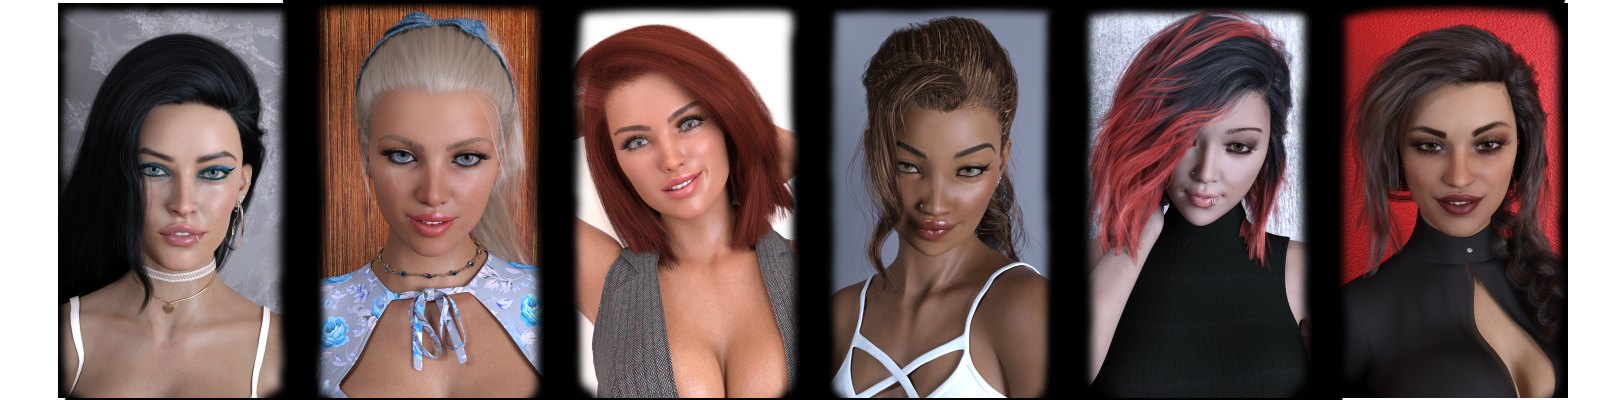 The Voiceless [Laundry Games] Adult xxx Game Download